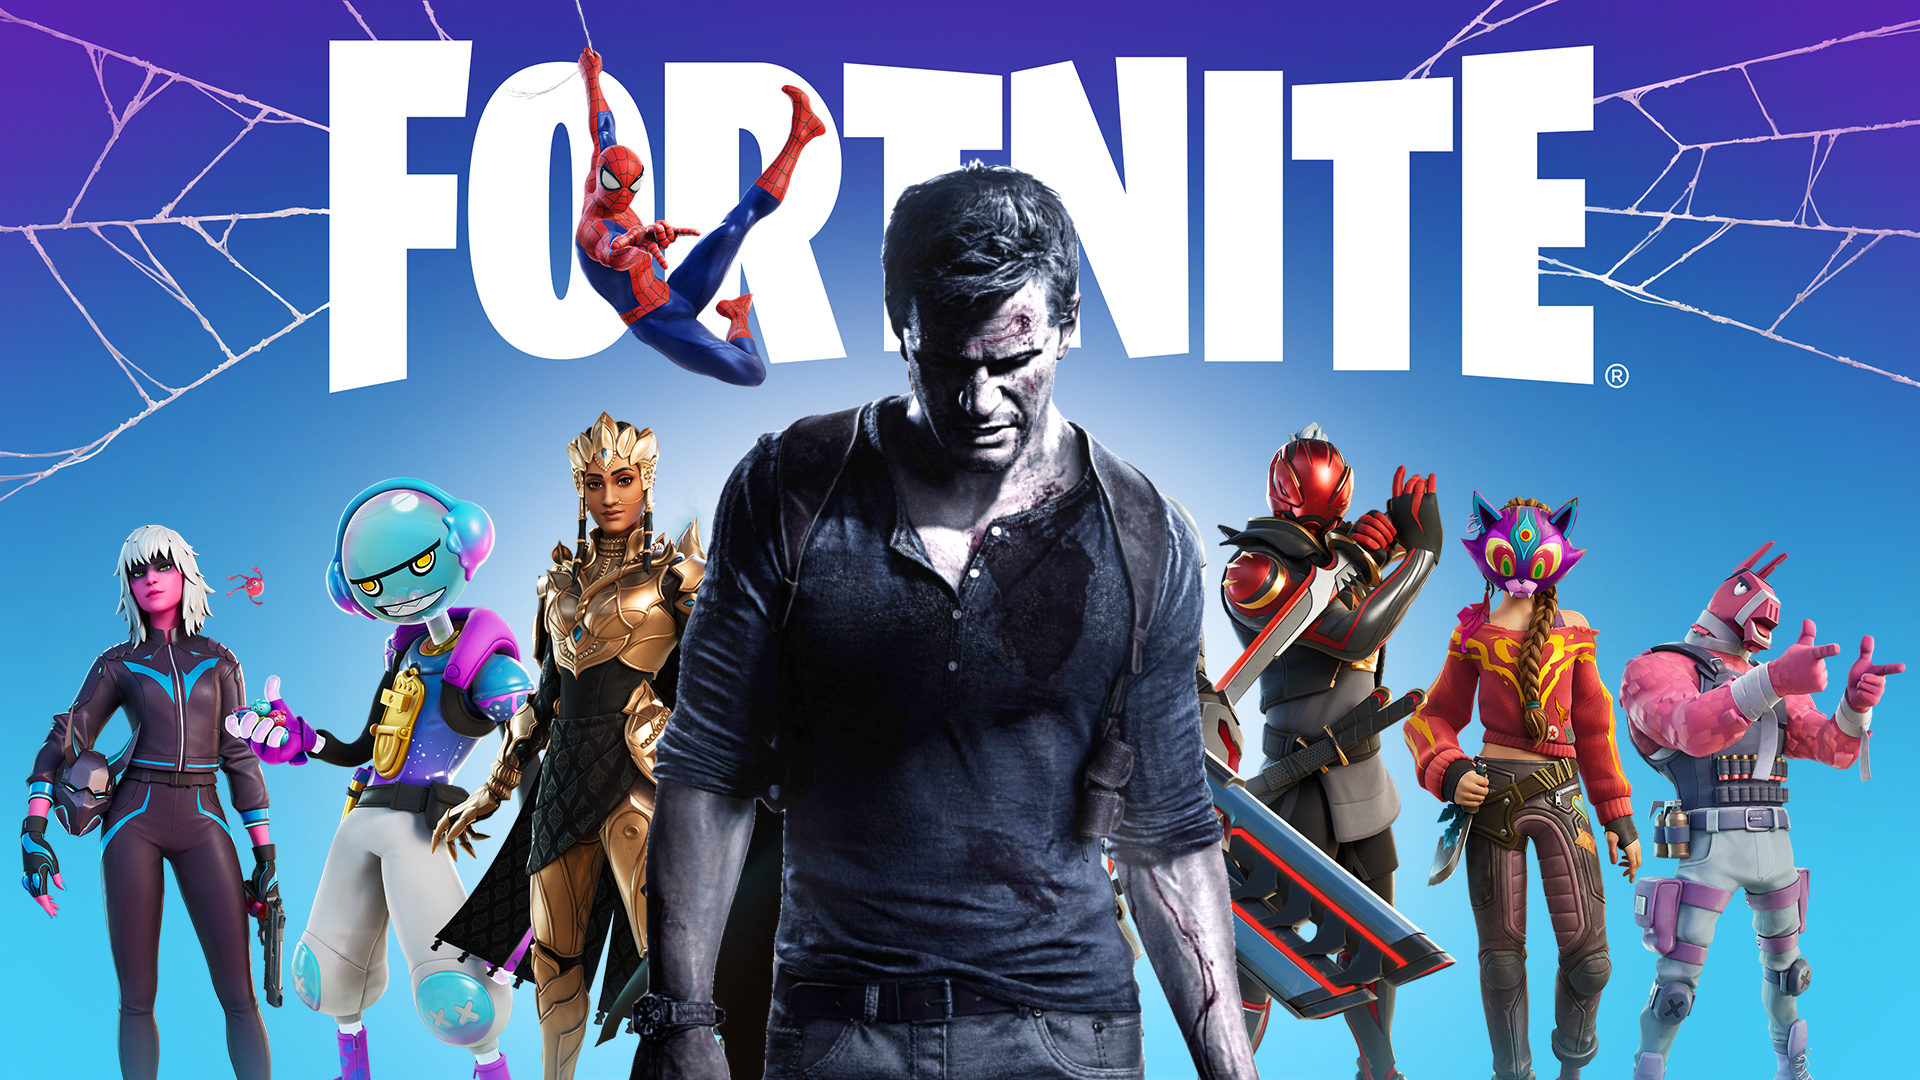 You'll soon be able to play as Nathan Drake in Fortnite, according to leak